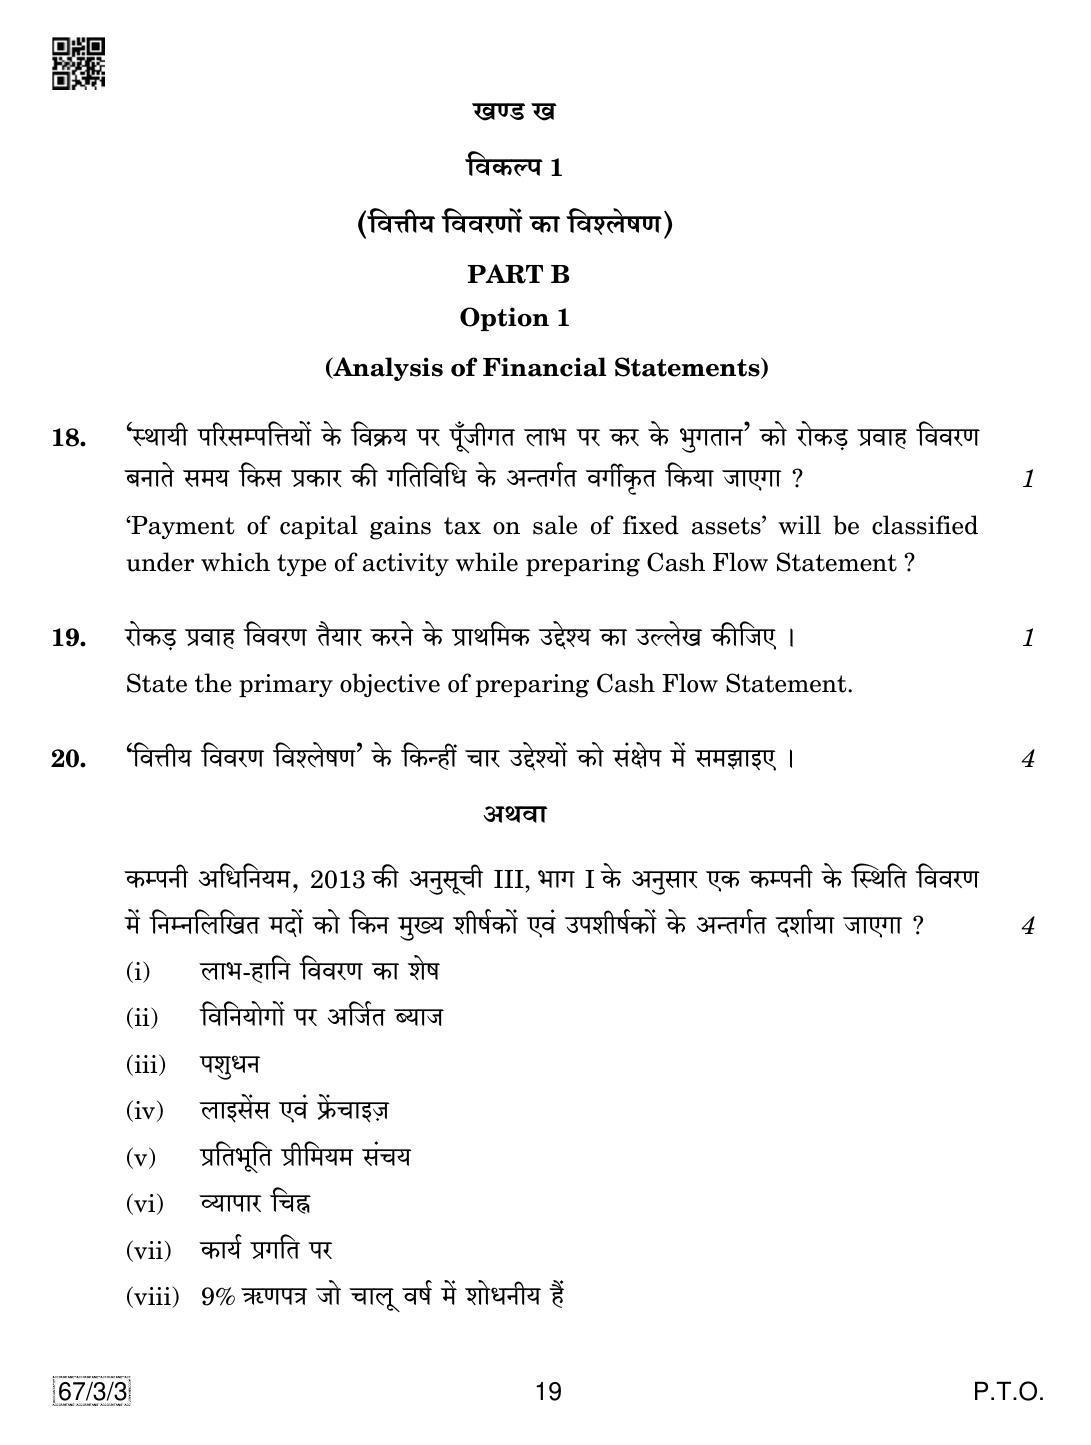 CBSE Class 12 67-3-3 Accountancy 2019 Question Paper - Page 19